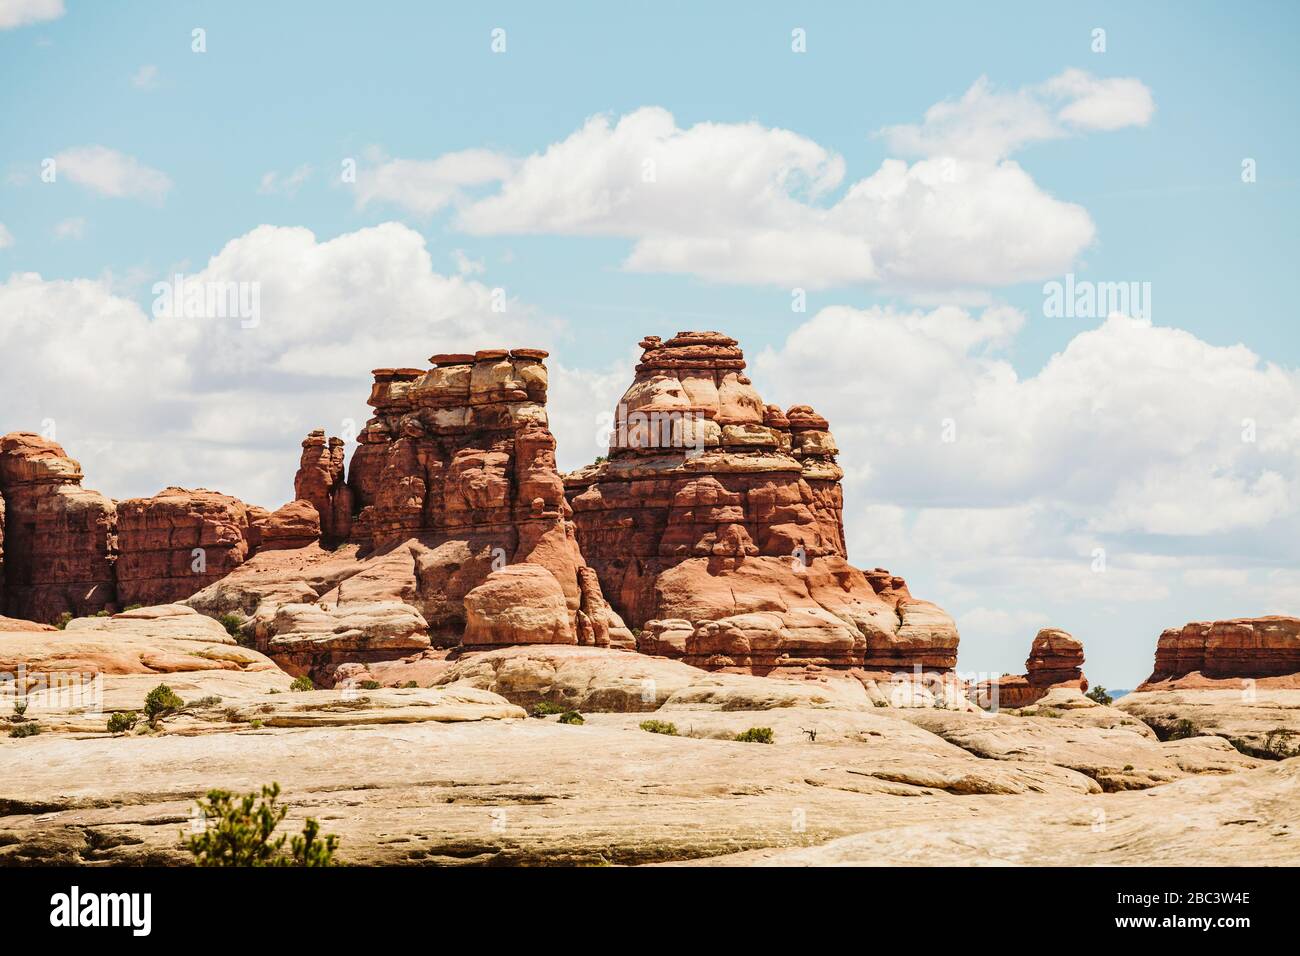 layered red sandstone towers on a sunny day in the maze utah Stock Photo